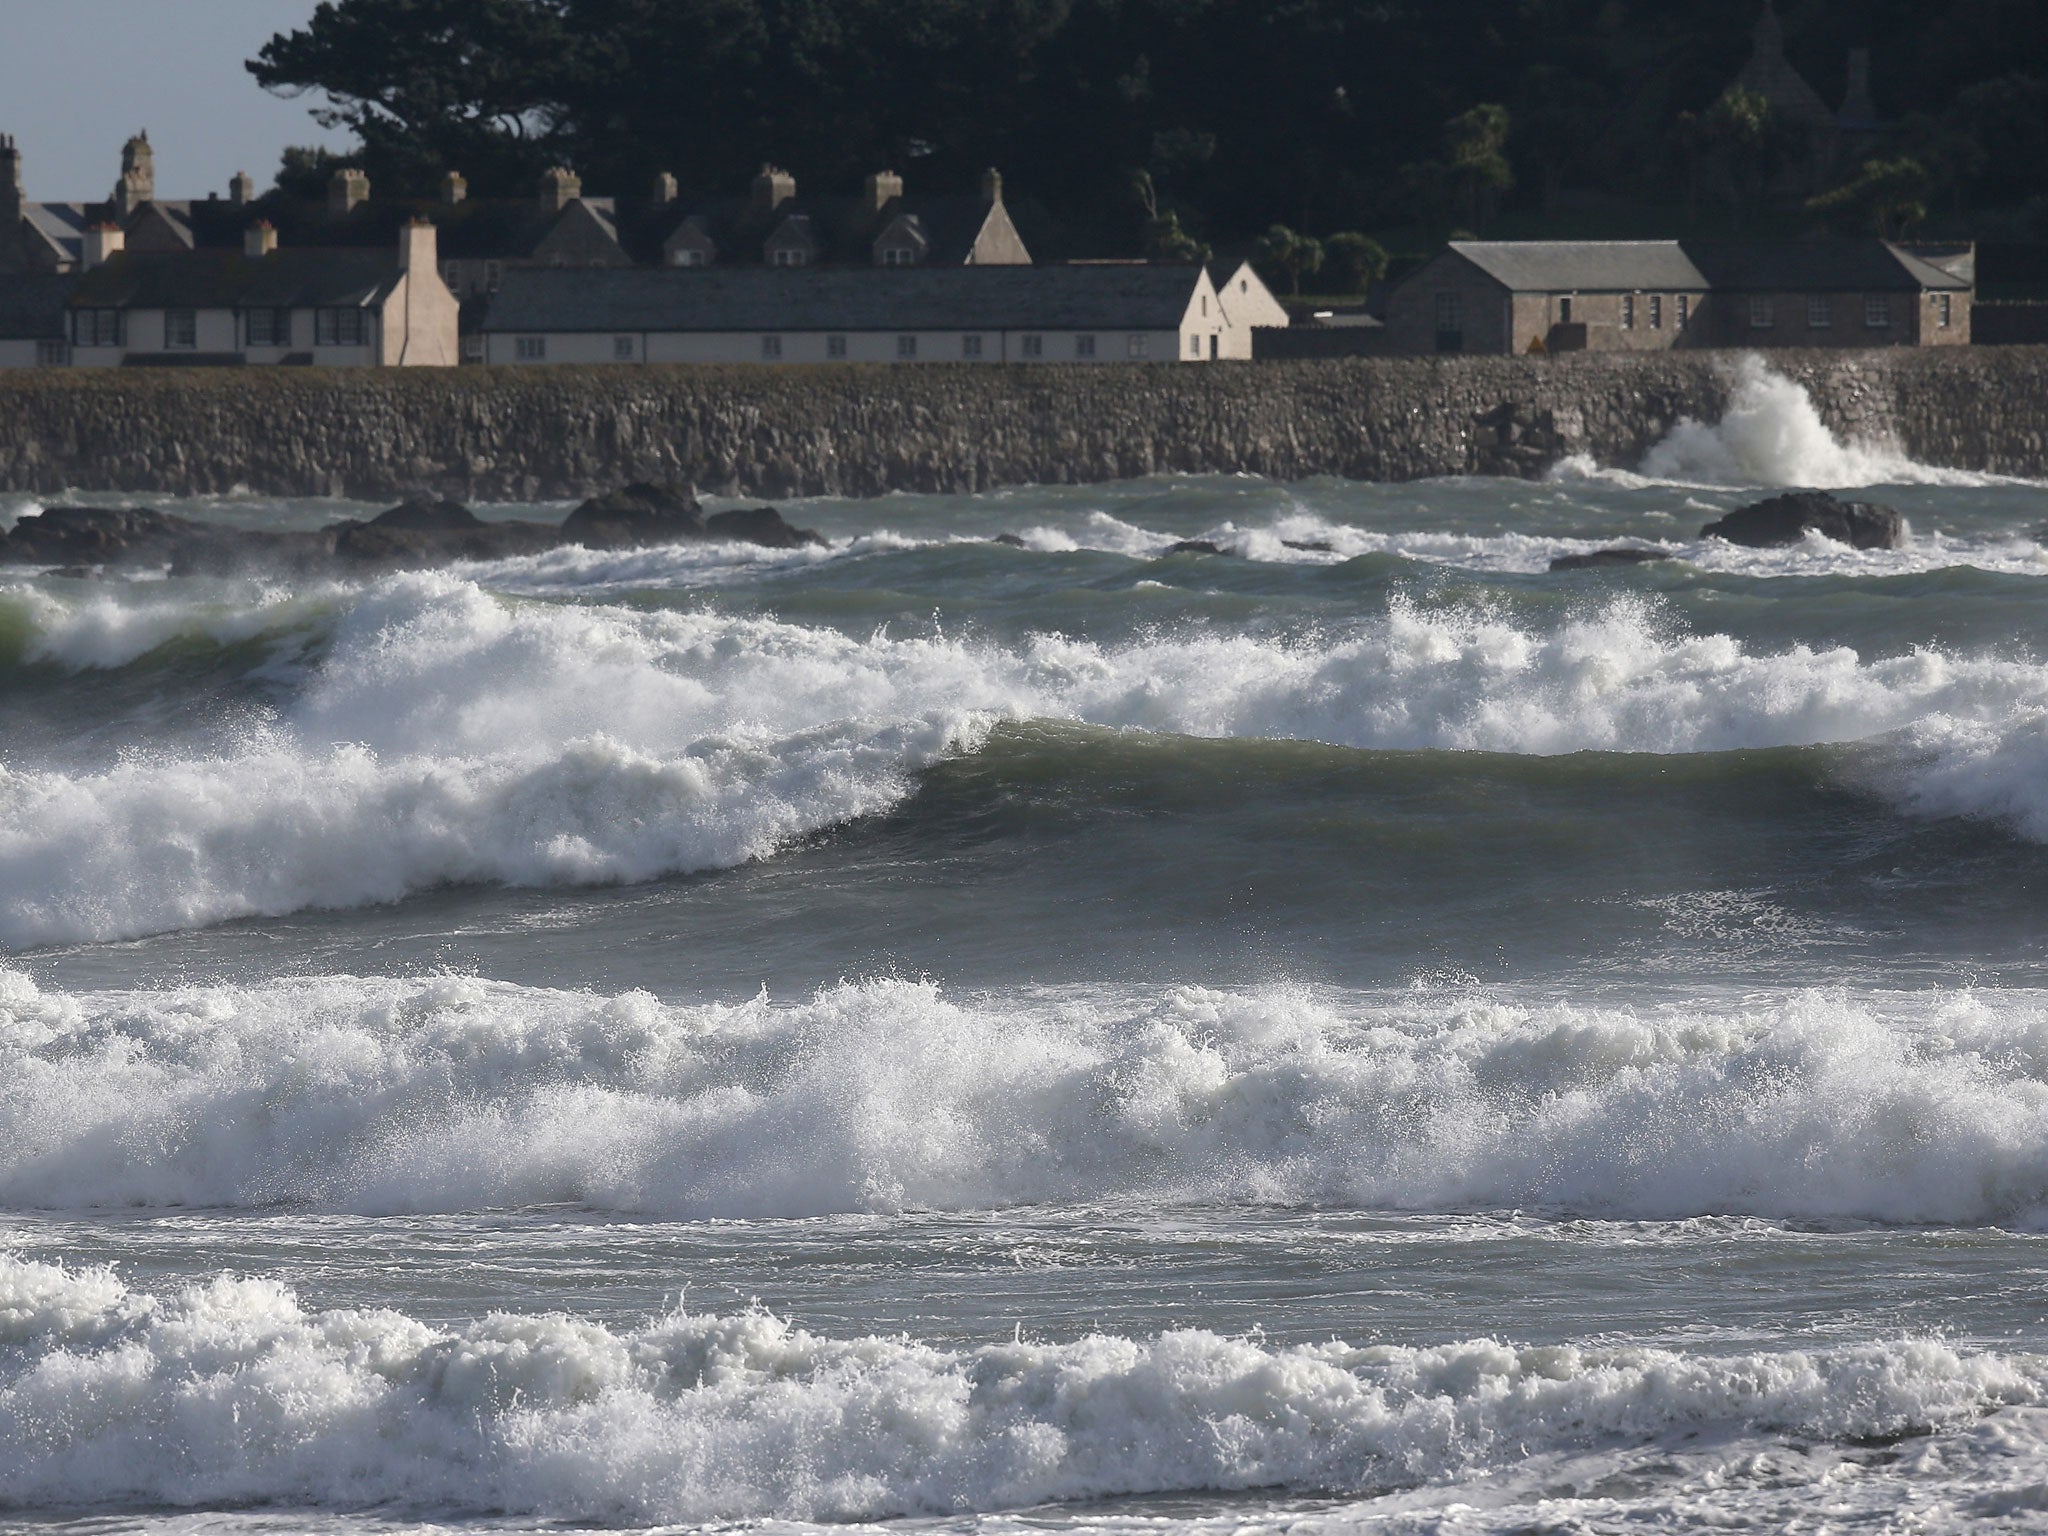 Communities along the south and west coasts of Cornwall have been warned of potential tidal flooding this weekend